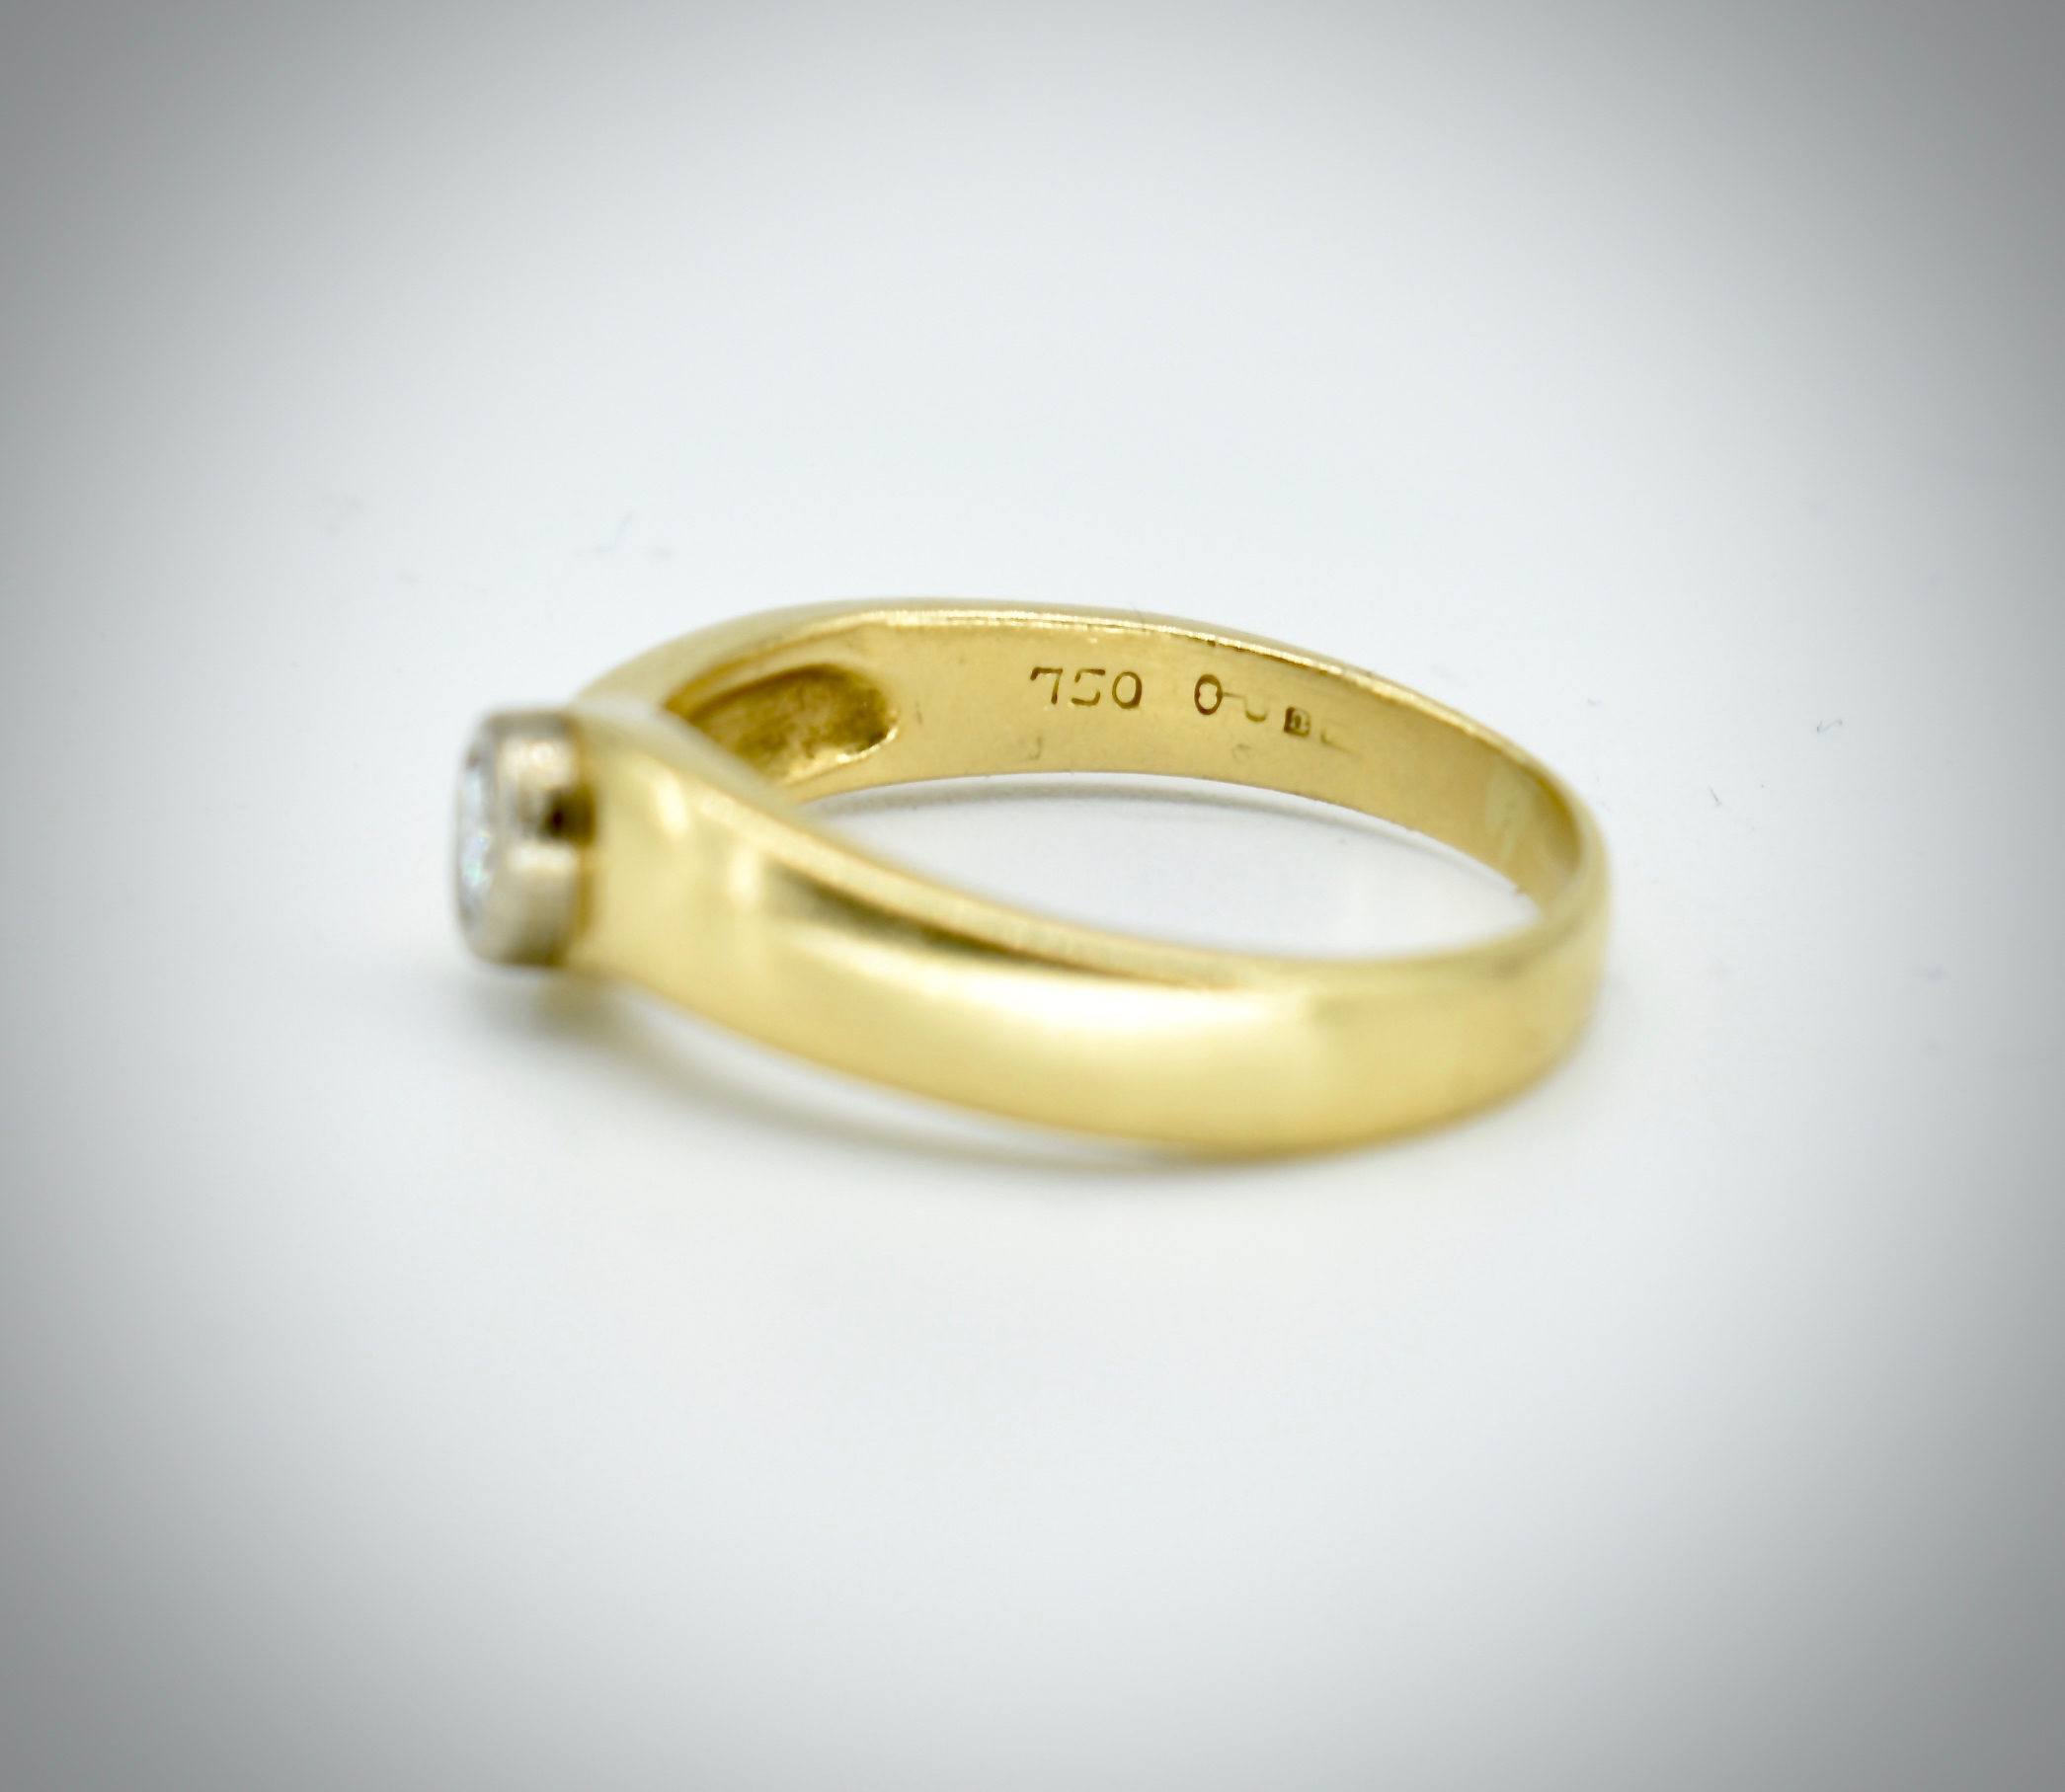 18ct Gold Diamond Solitaire Ring - Image 2 of 4